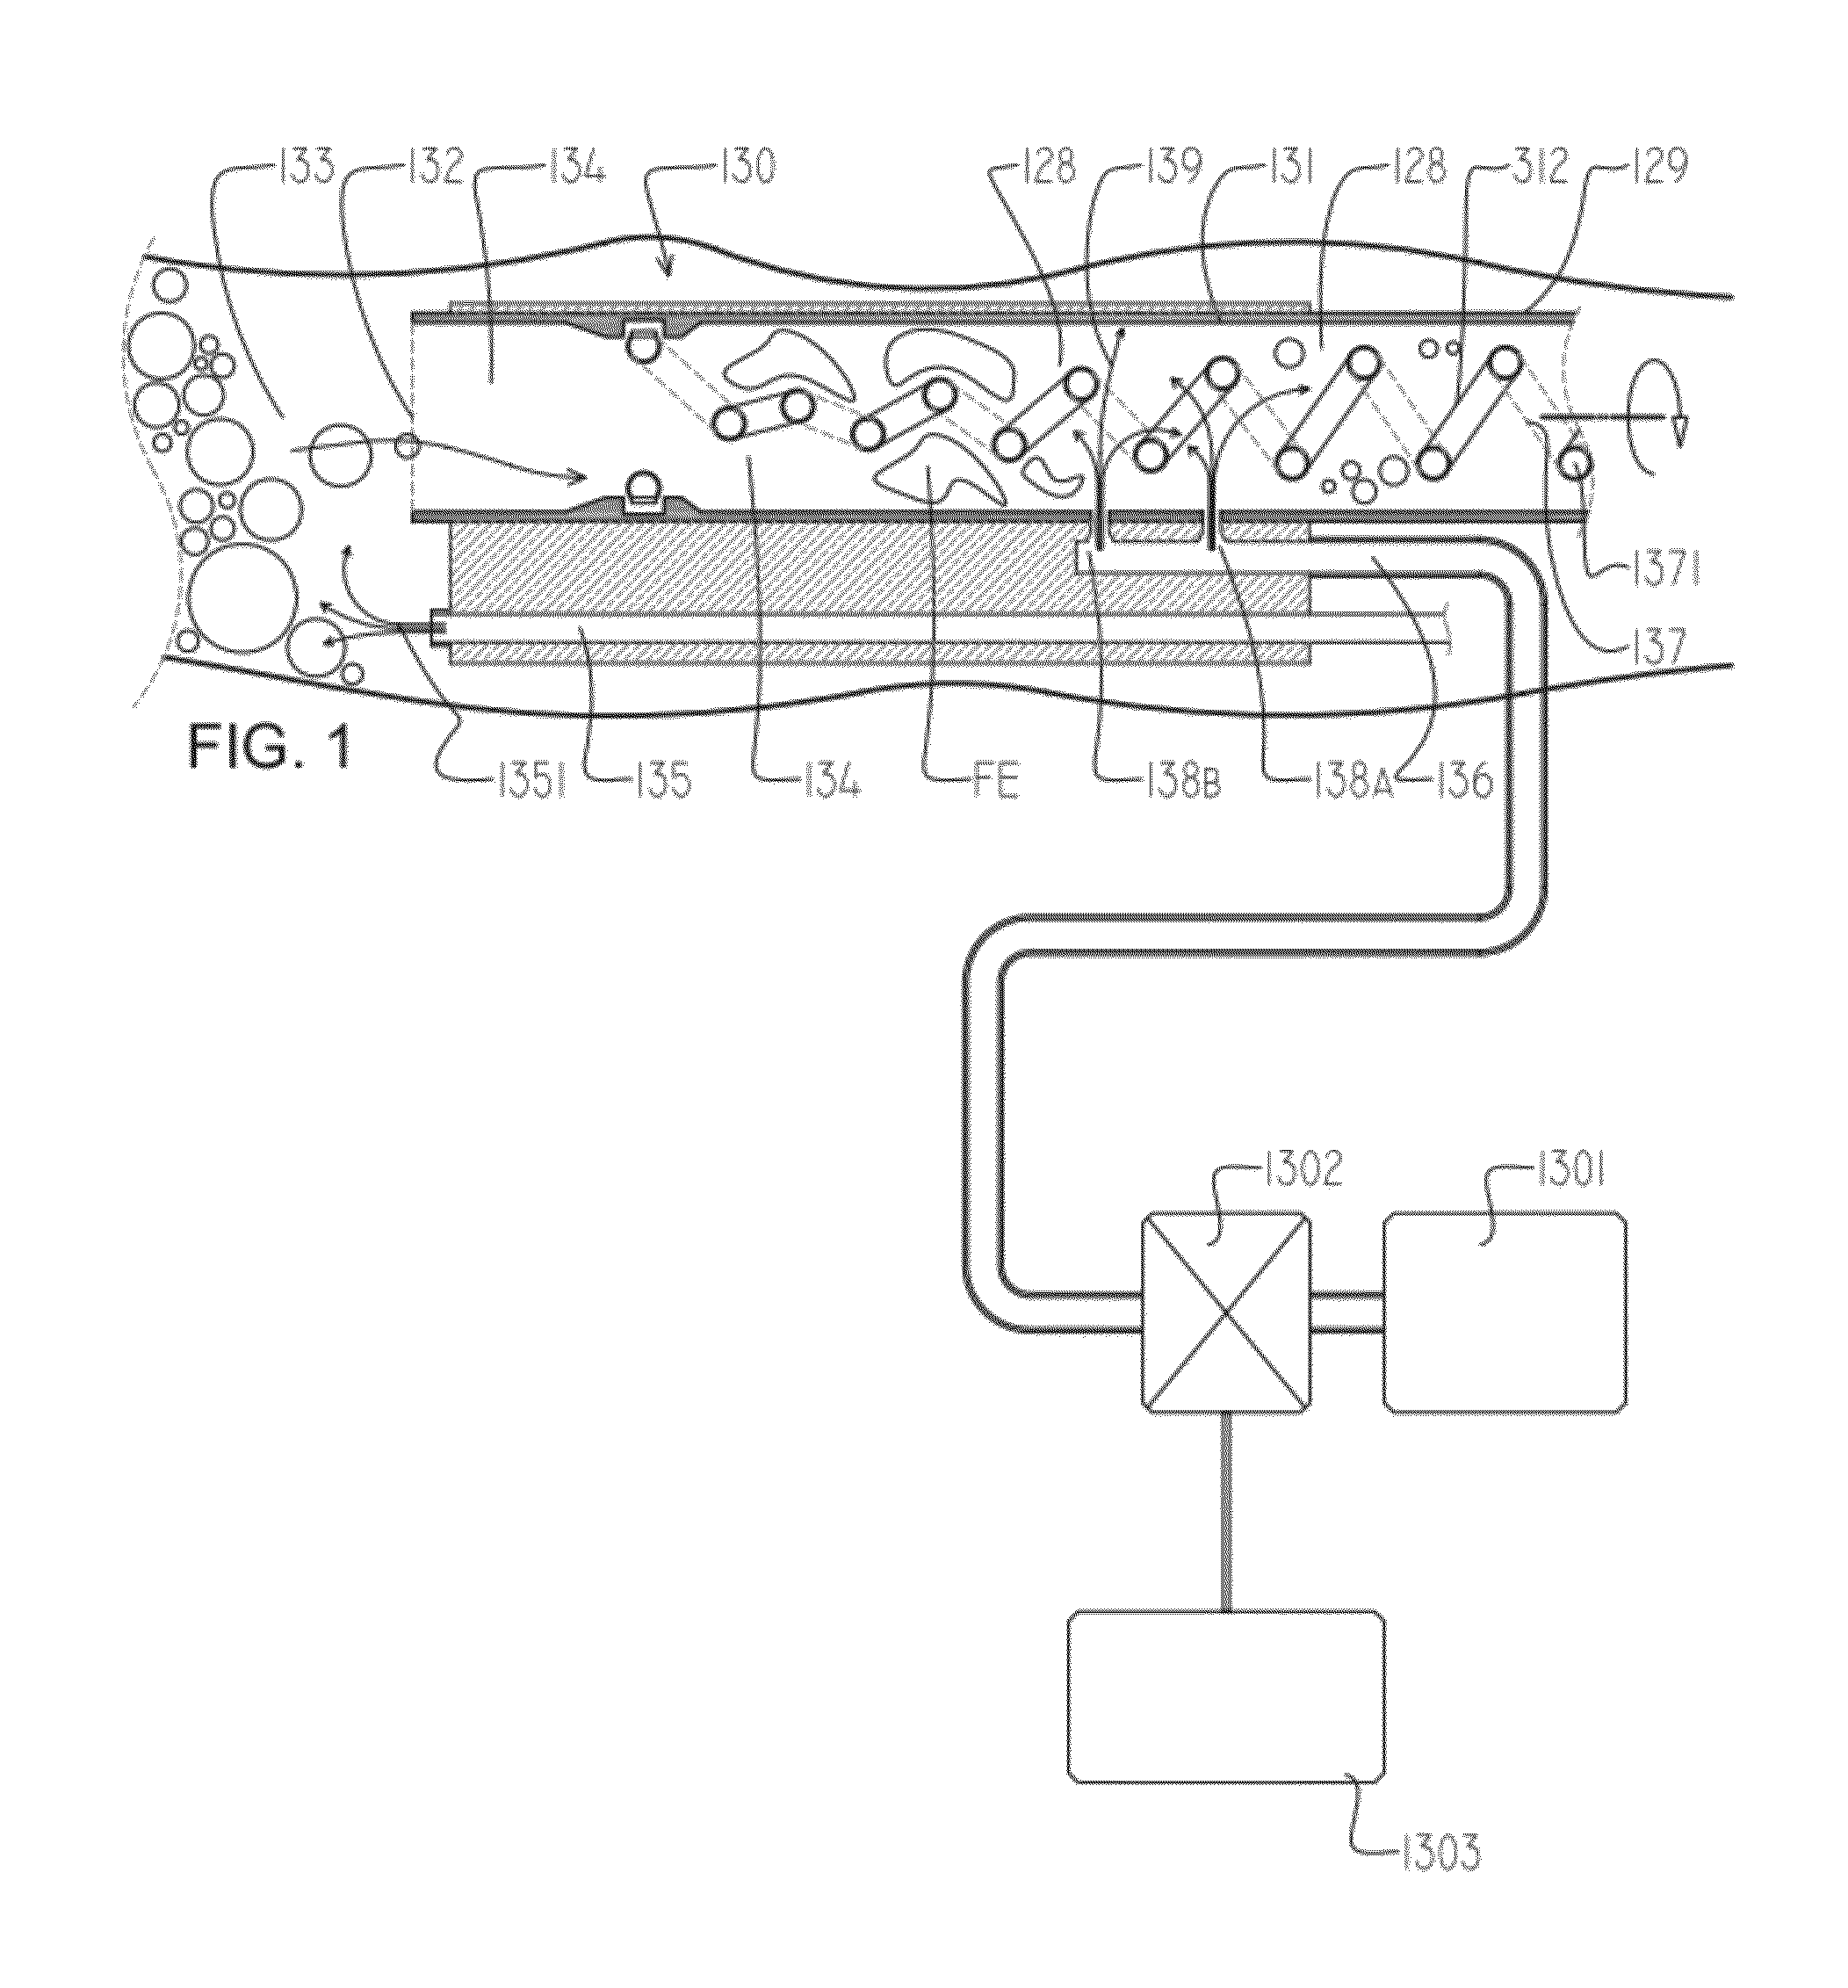 Systems and methods for cleaning body cavities